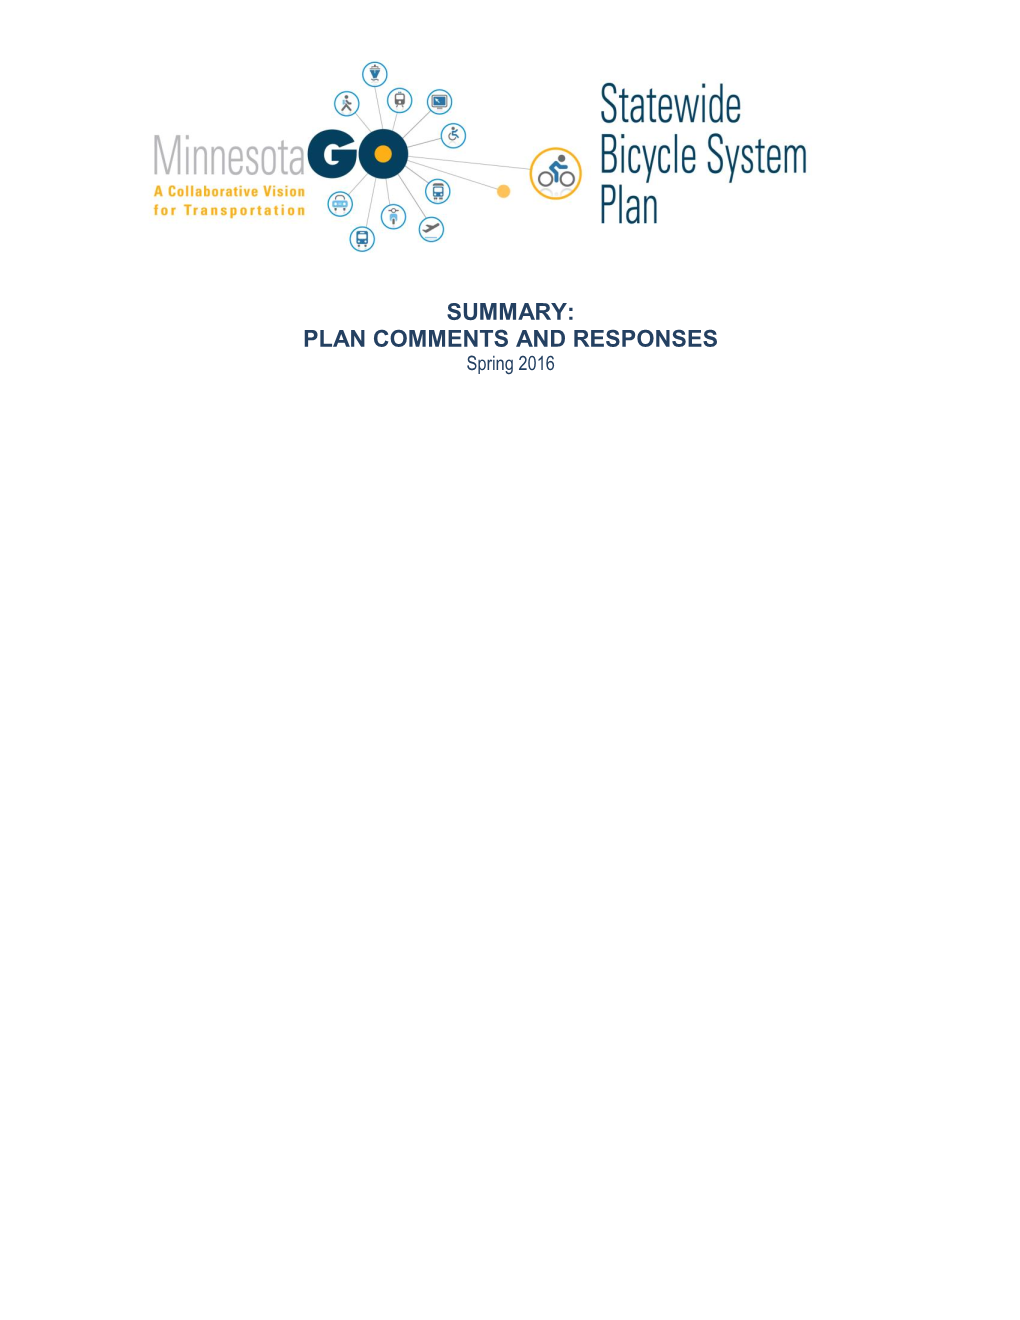 SUMMARY: PLAN COMMENTS and RESPONSES Spring 2016